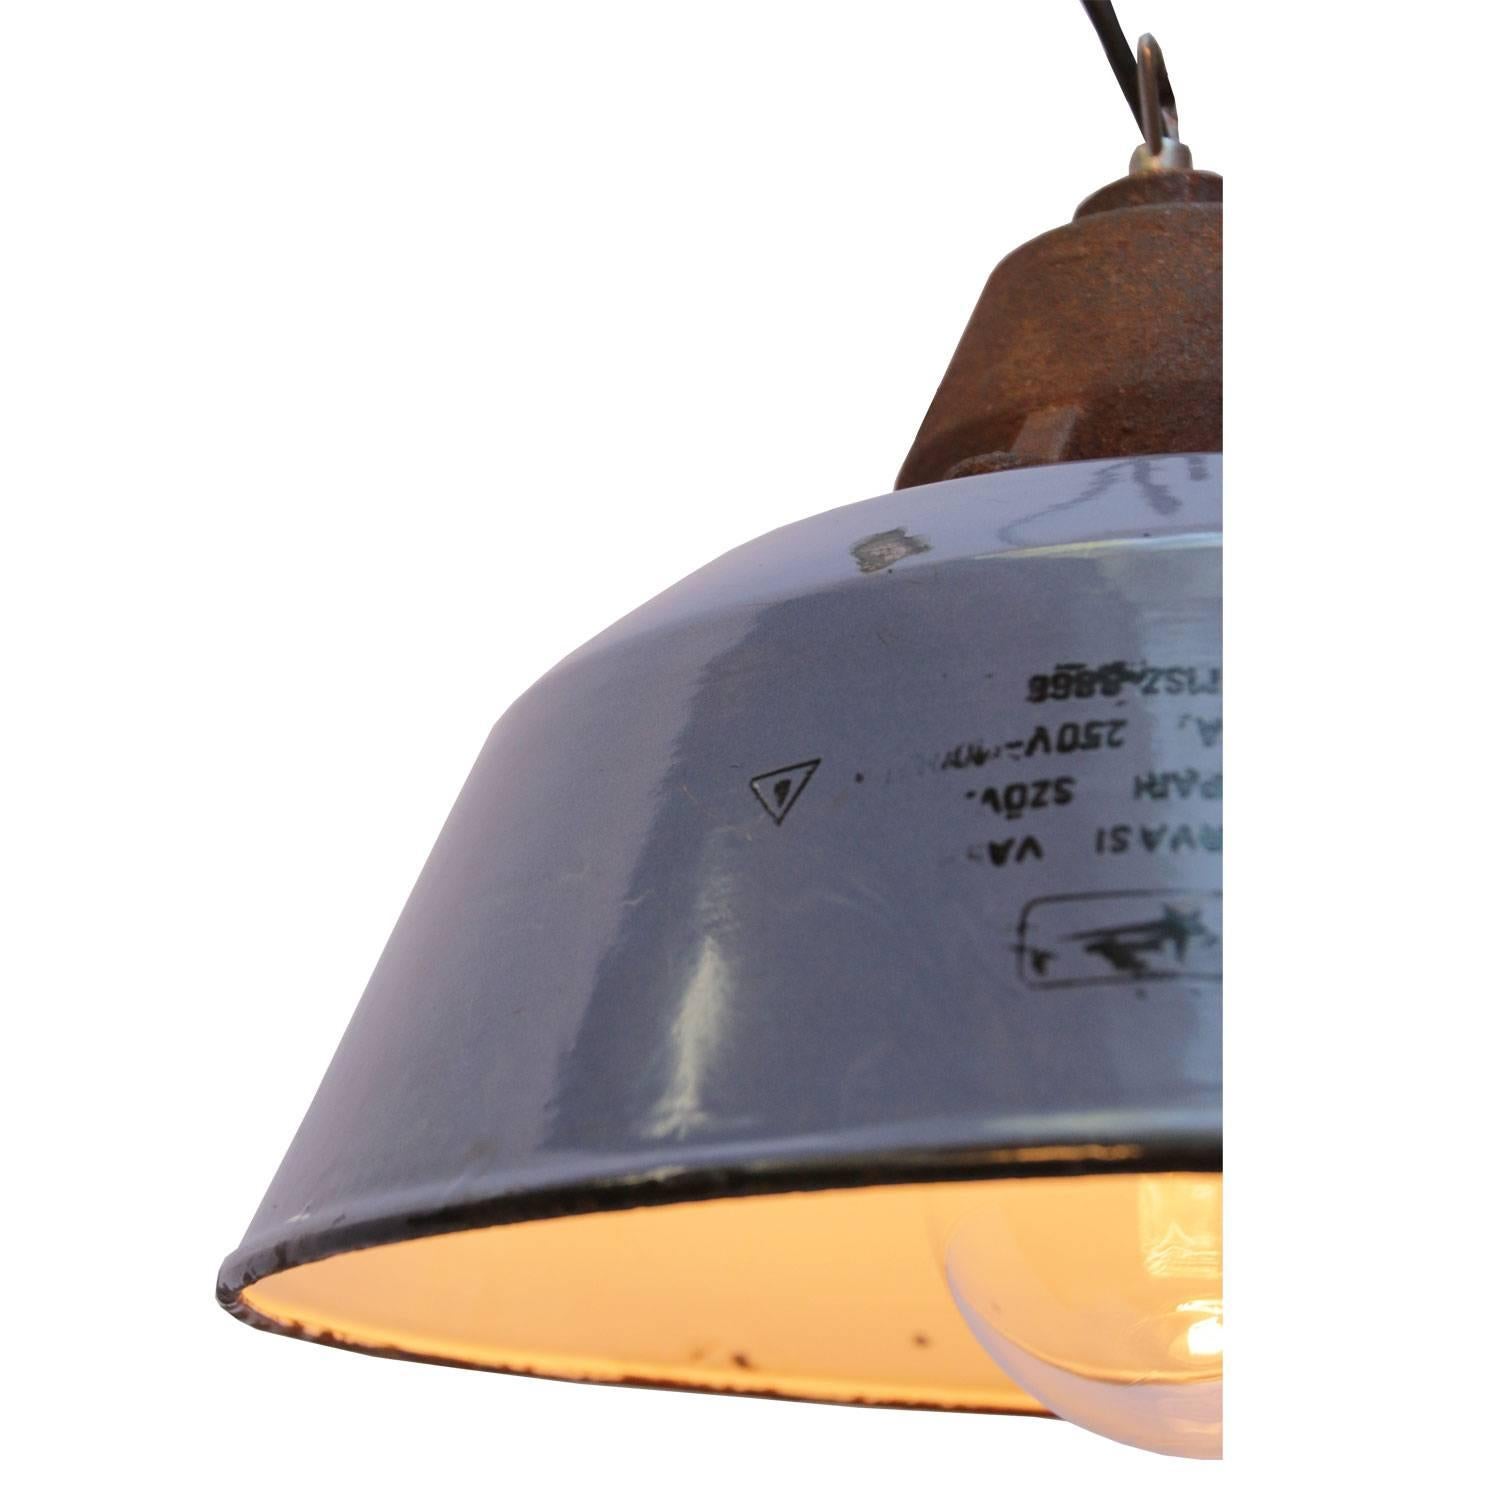 Factory pendant. Blue enamel white interior. Cast iron top with clear glass.

Weight: 3.4 kg / 7.5 lb

Priced per individual item. All lamps have been made suitable by international standards for incandescent light bulbs, energy-efficient and LED